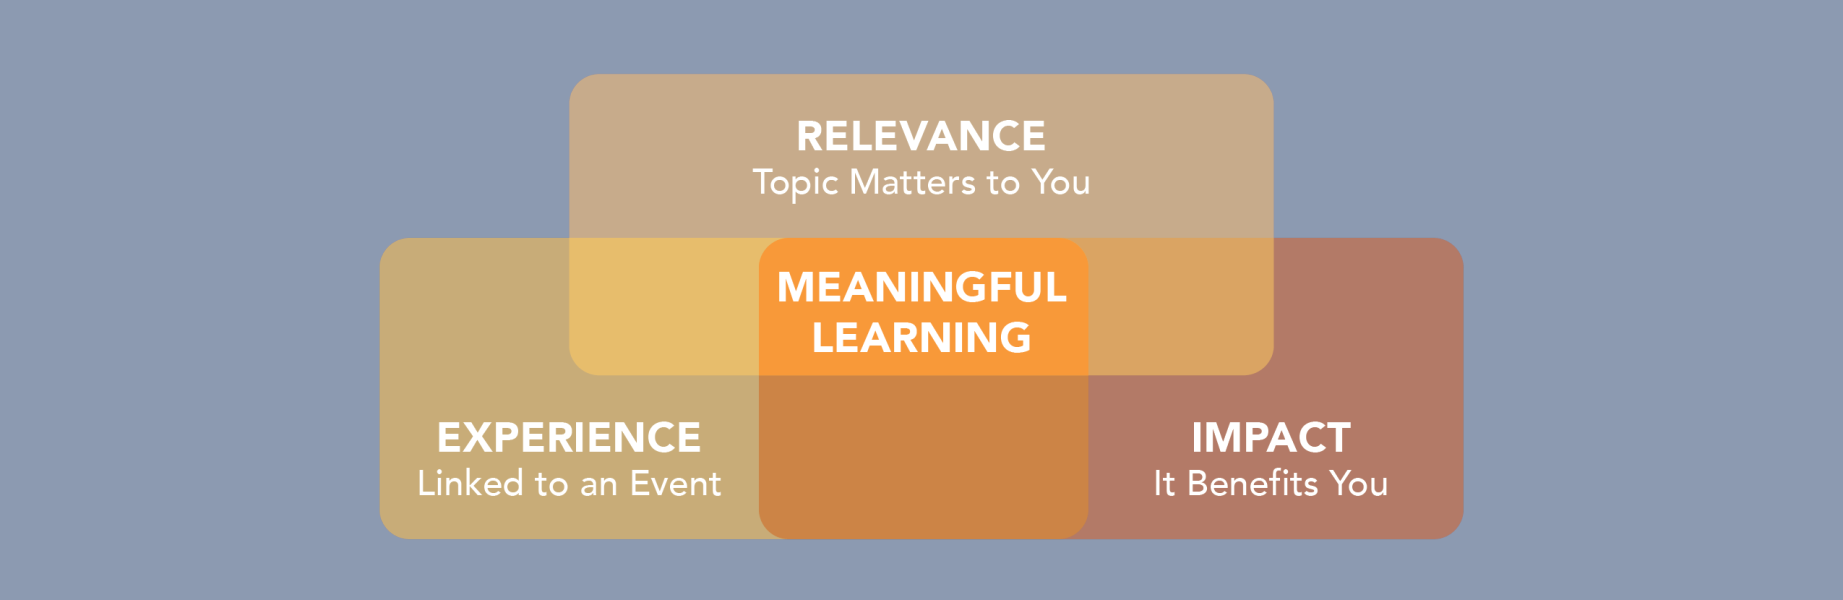 Three Steps for Meaningful Learning